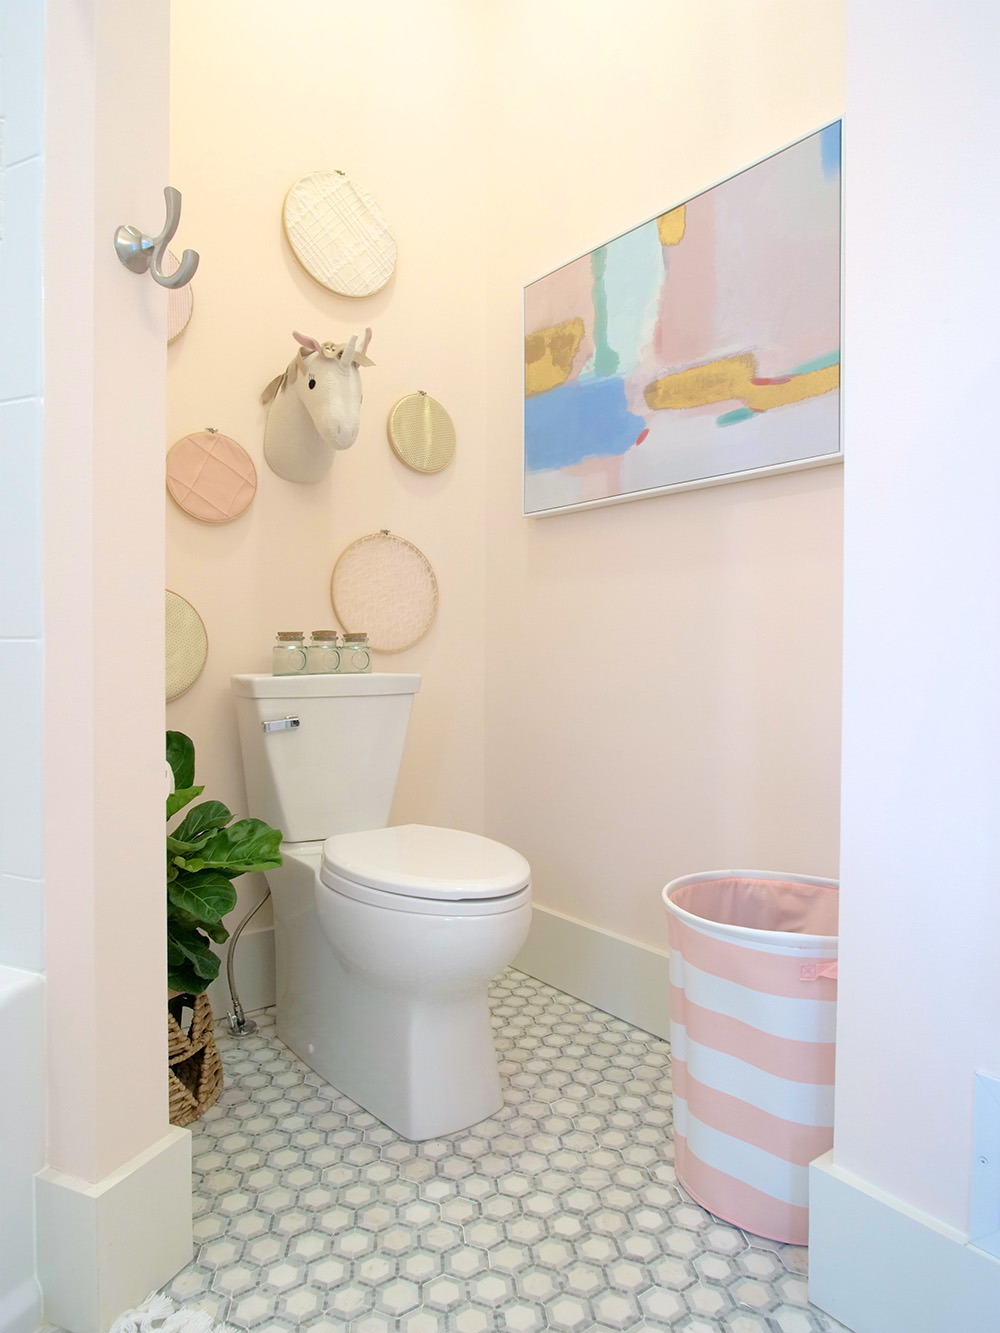 A white toilet, white and grey tile, peach colored walls, wall art and a pink and white laundry basket.